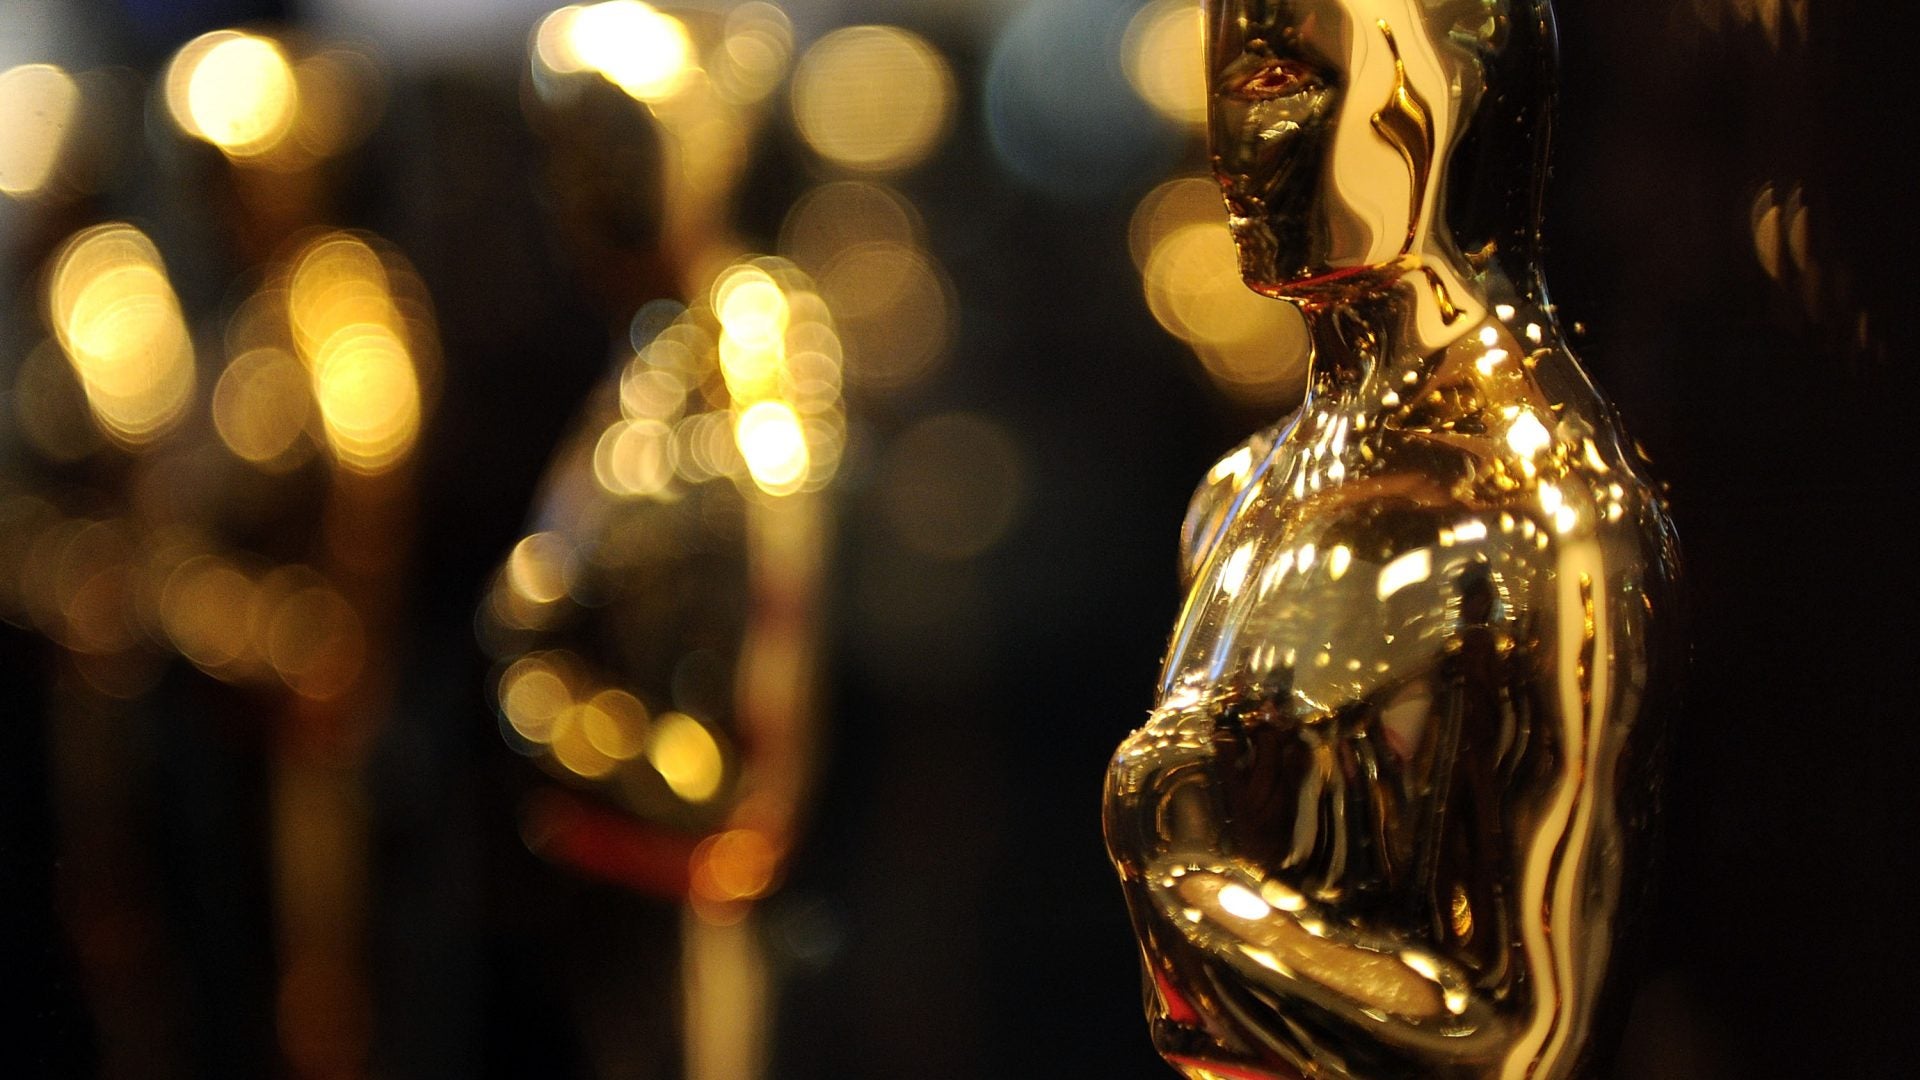 Academy Awards Changes Rules To Include Streaming Due To COVID-19